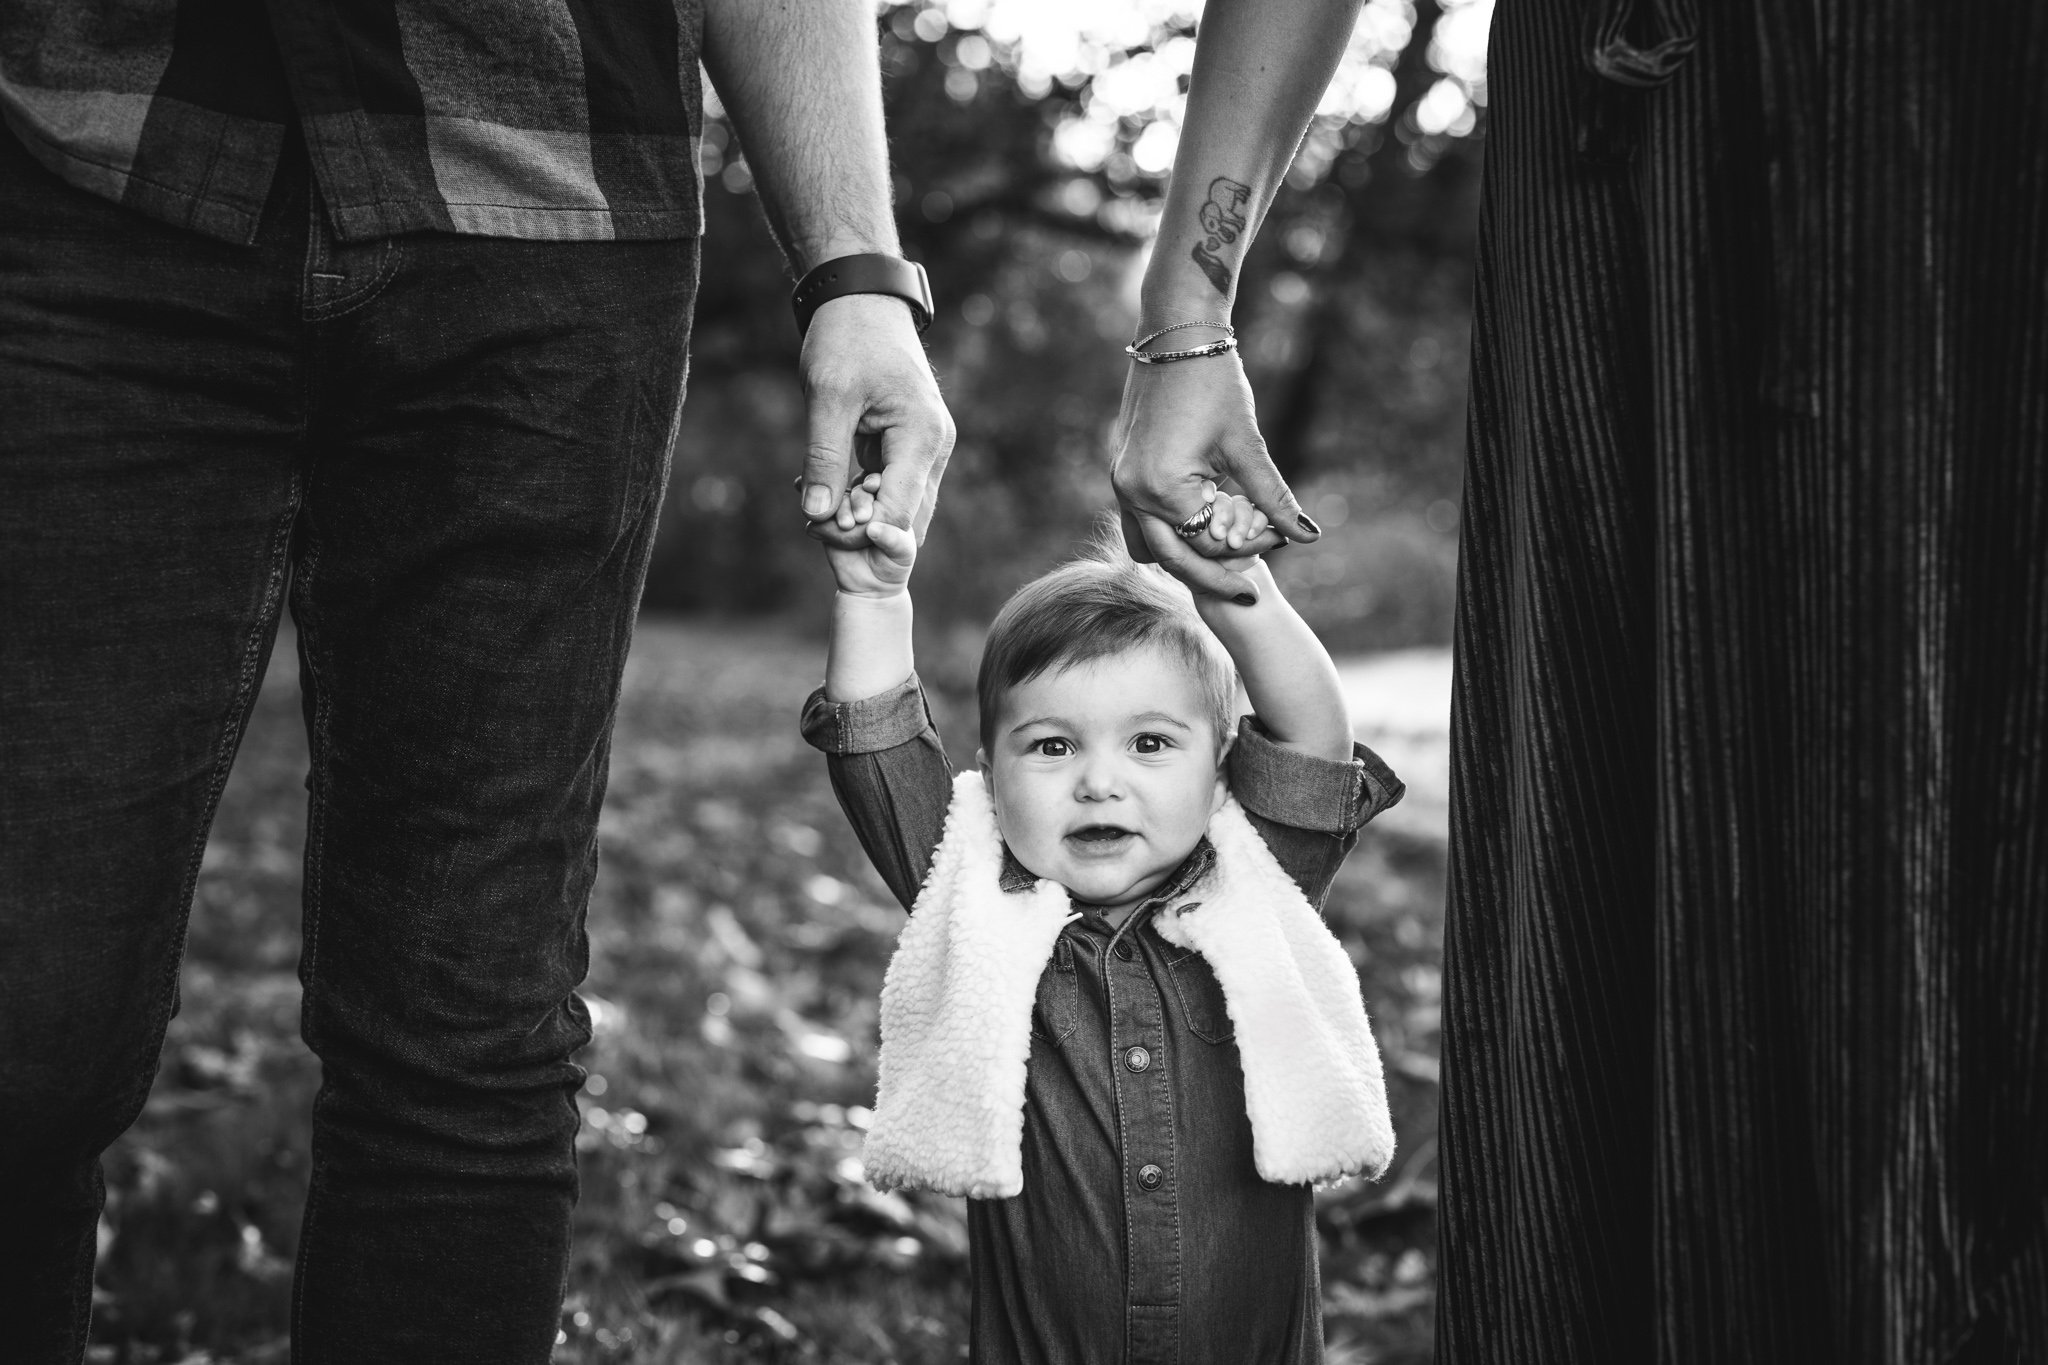  Black and white edit of a baby walking while holding mom and dad's hands by Nicole Hawkins Photography. NJ family photographer #NicoleHawkinsPhotography #NicoleHawkinsFamily #fallfamilyphotos #fallphotos #familyphotographerNJ #NJfallfamilypics 